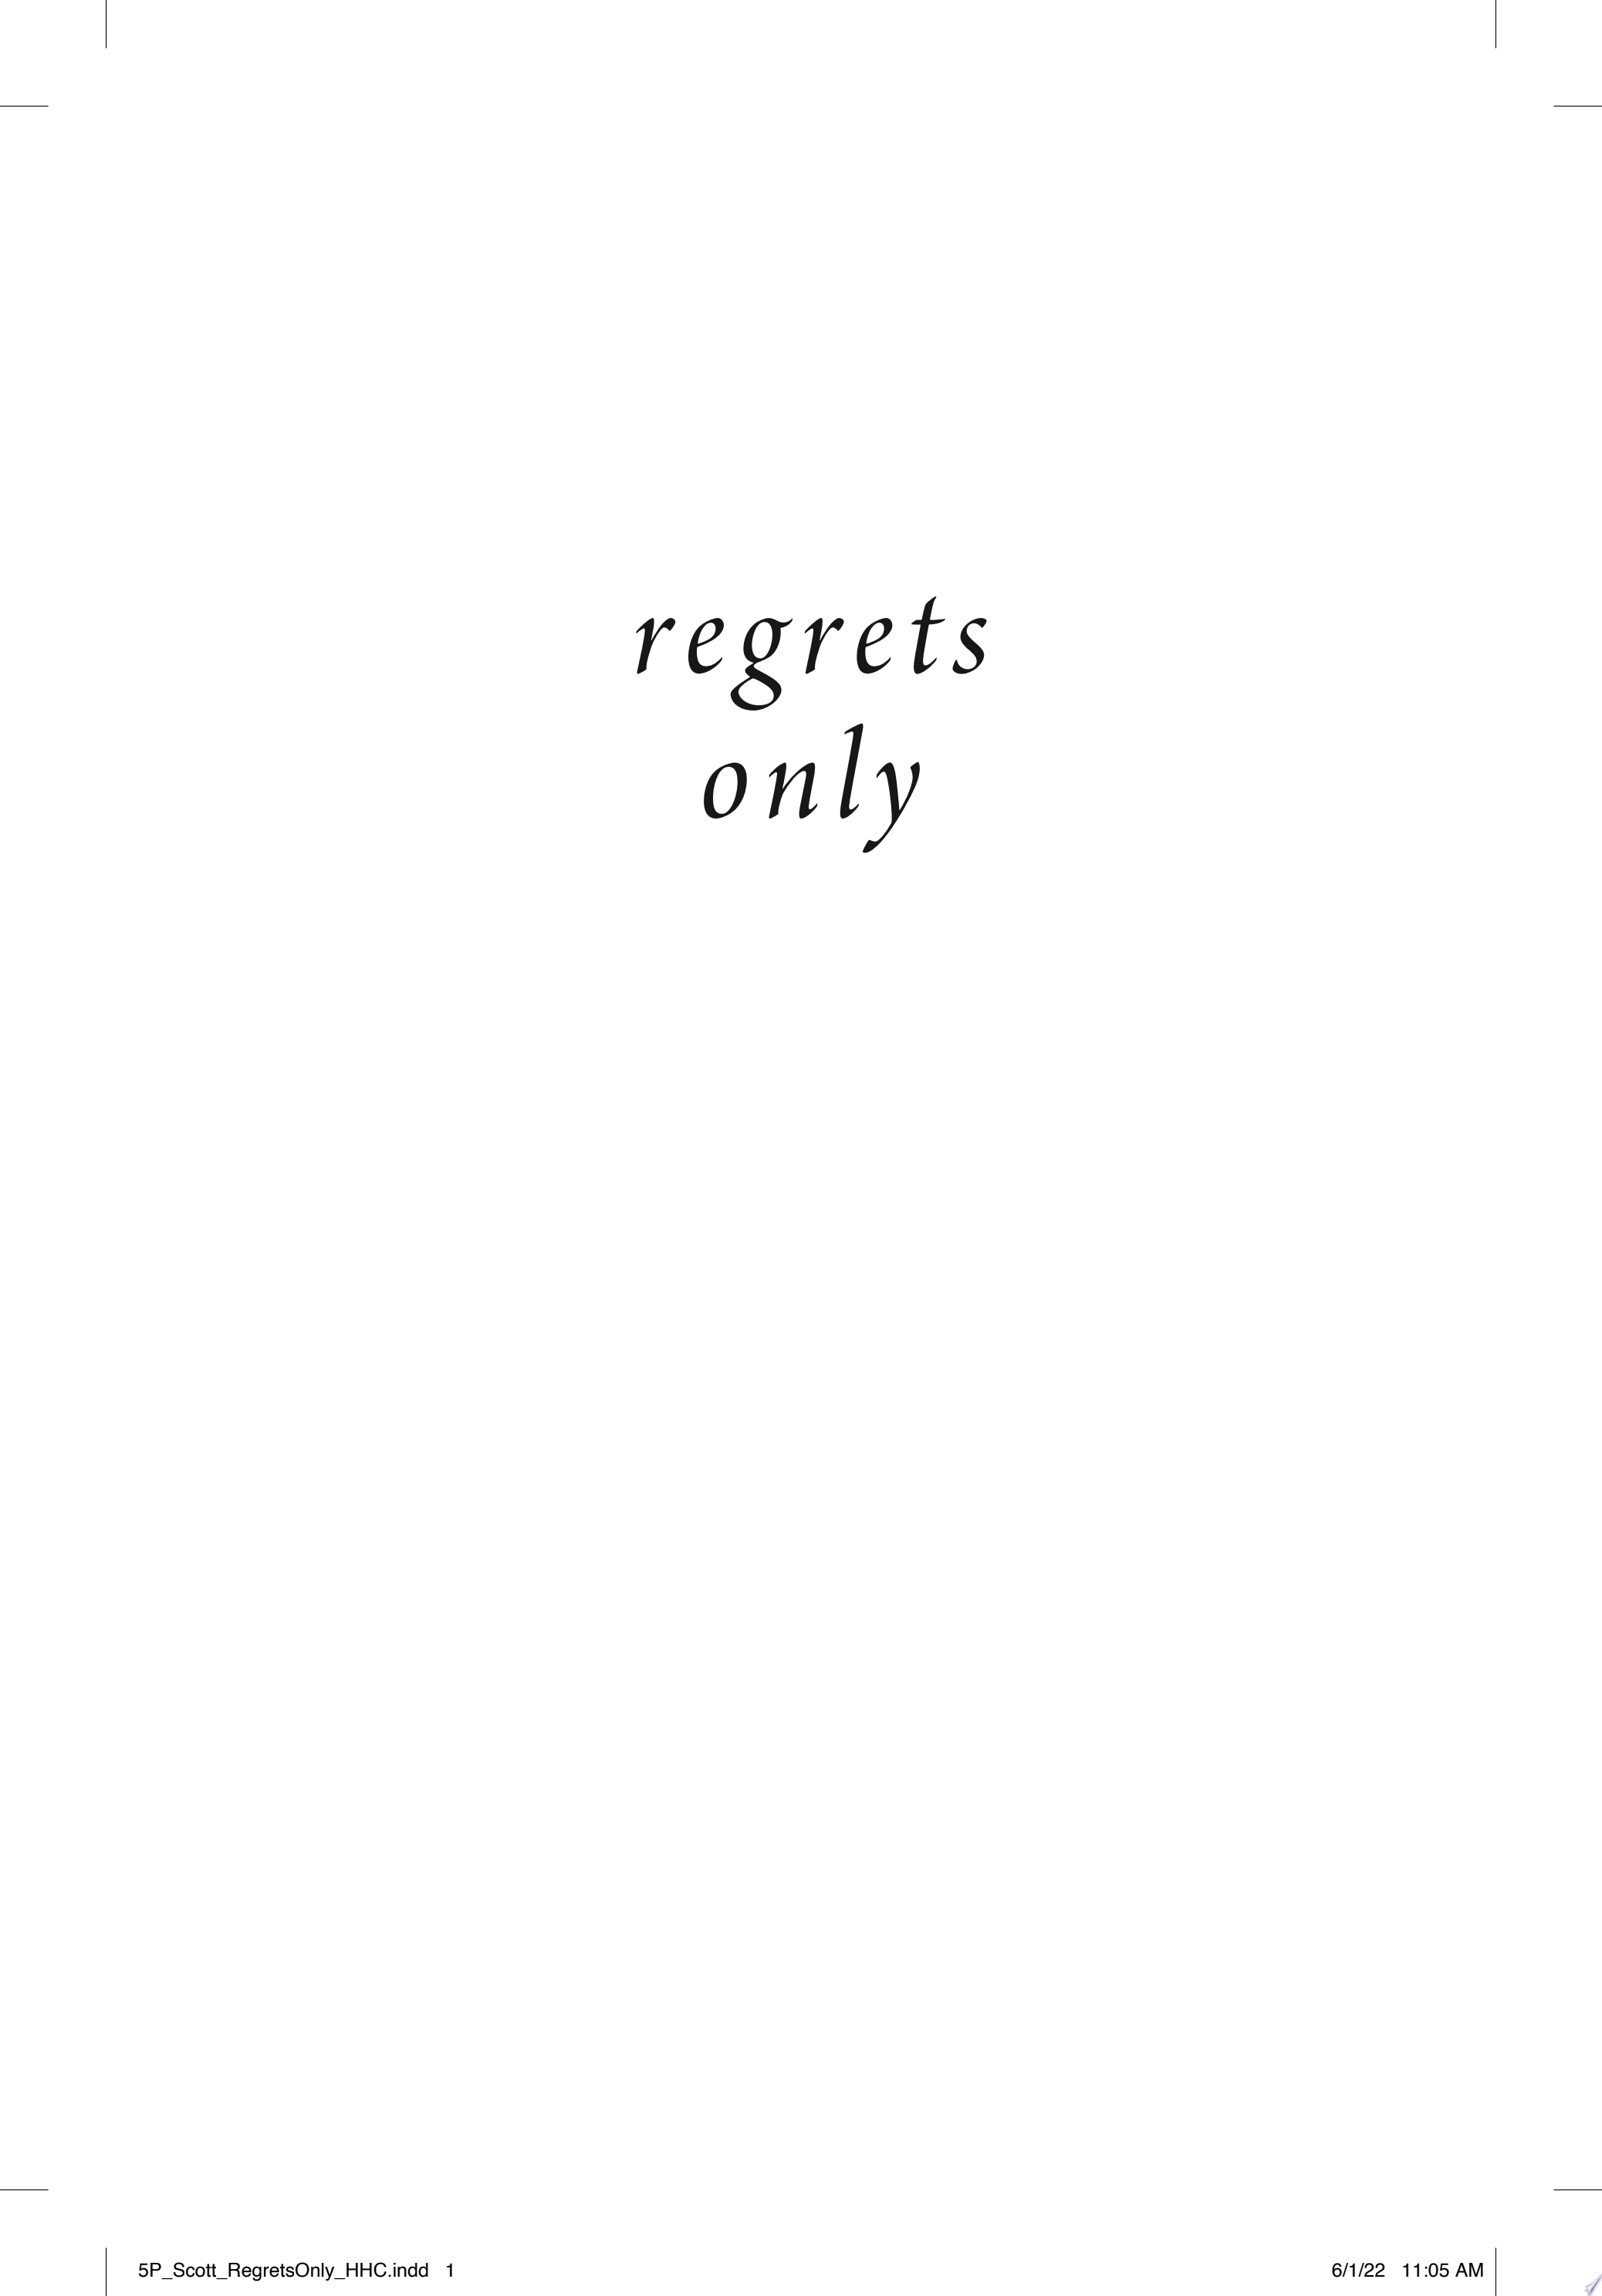 Image for "Regrets Only"